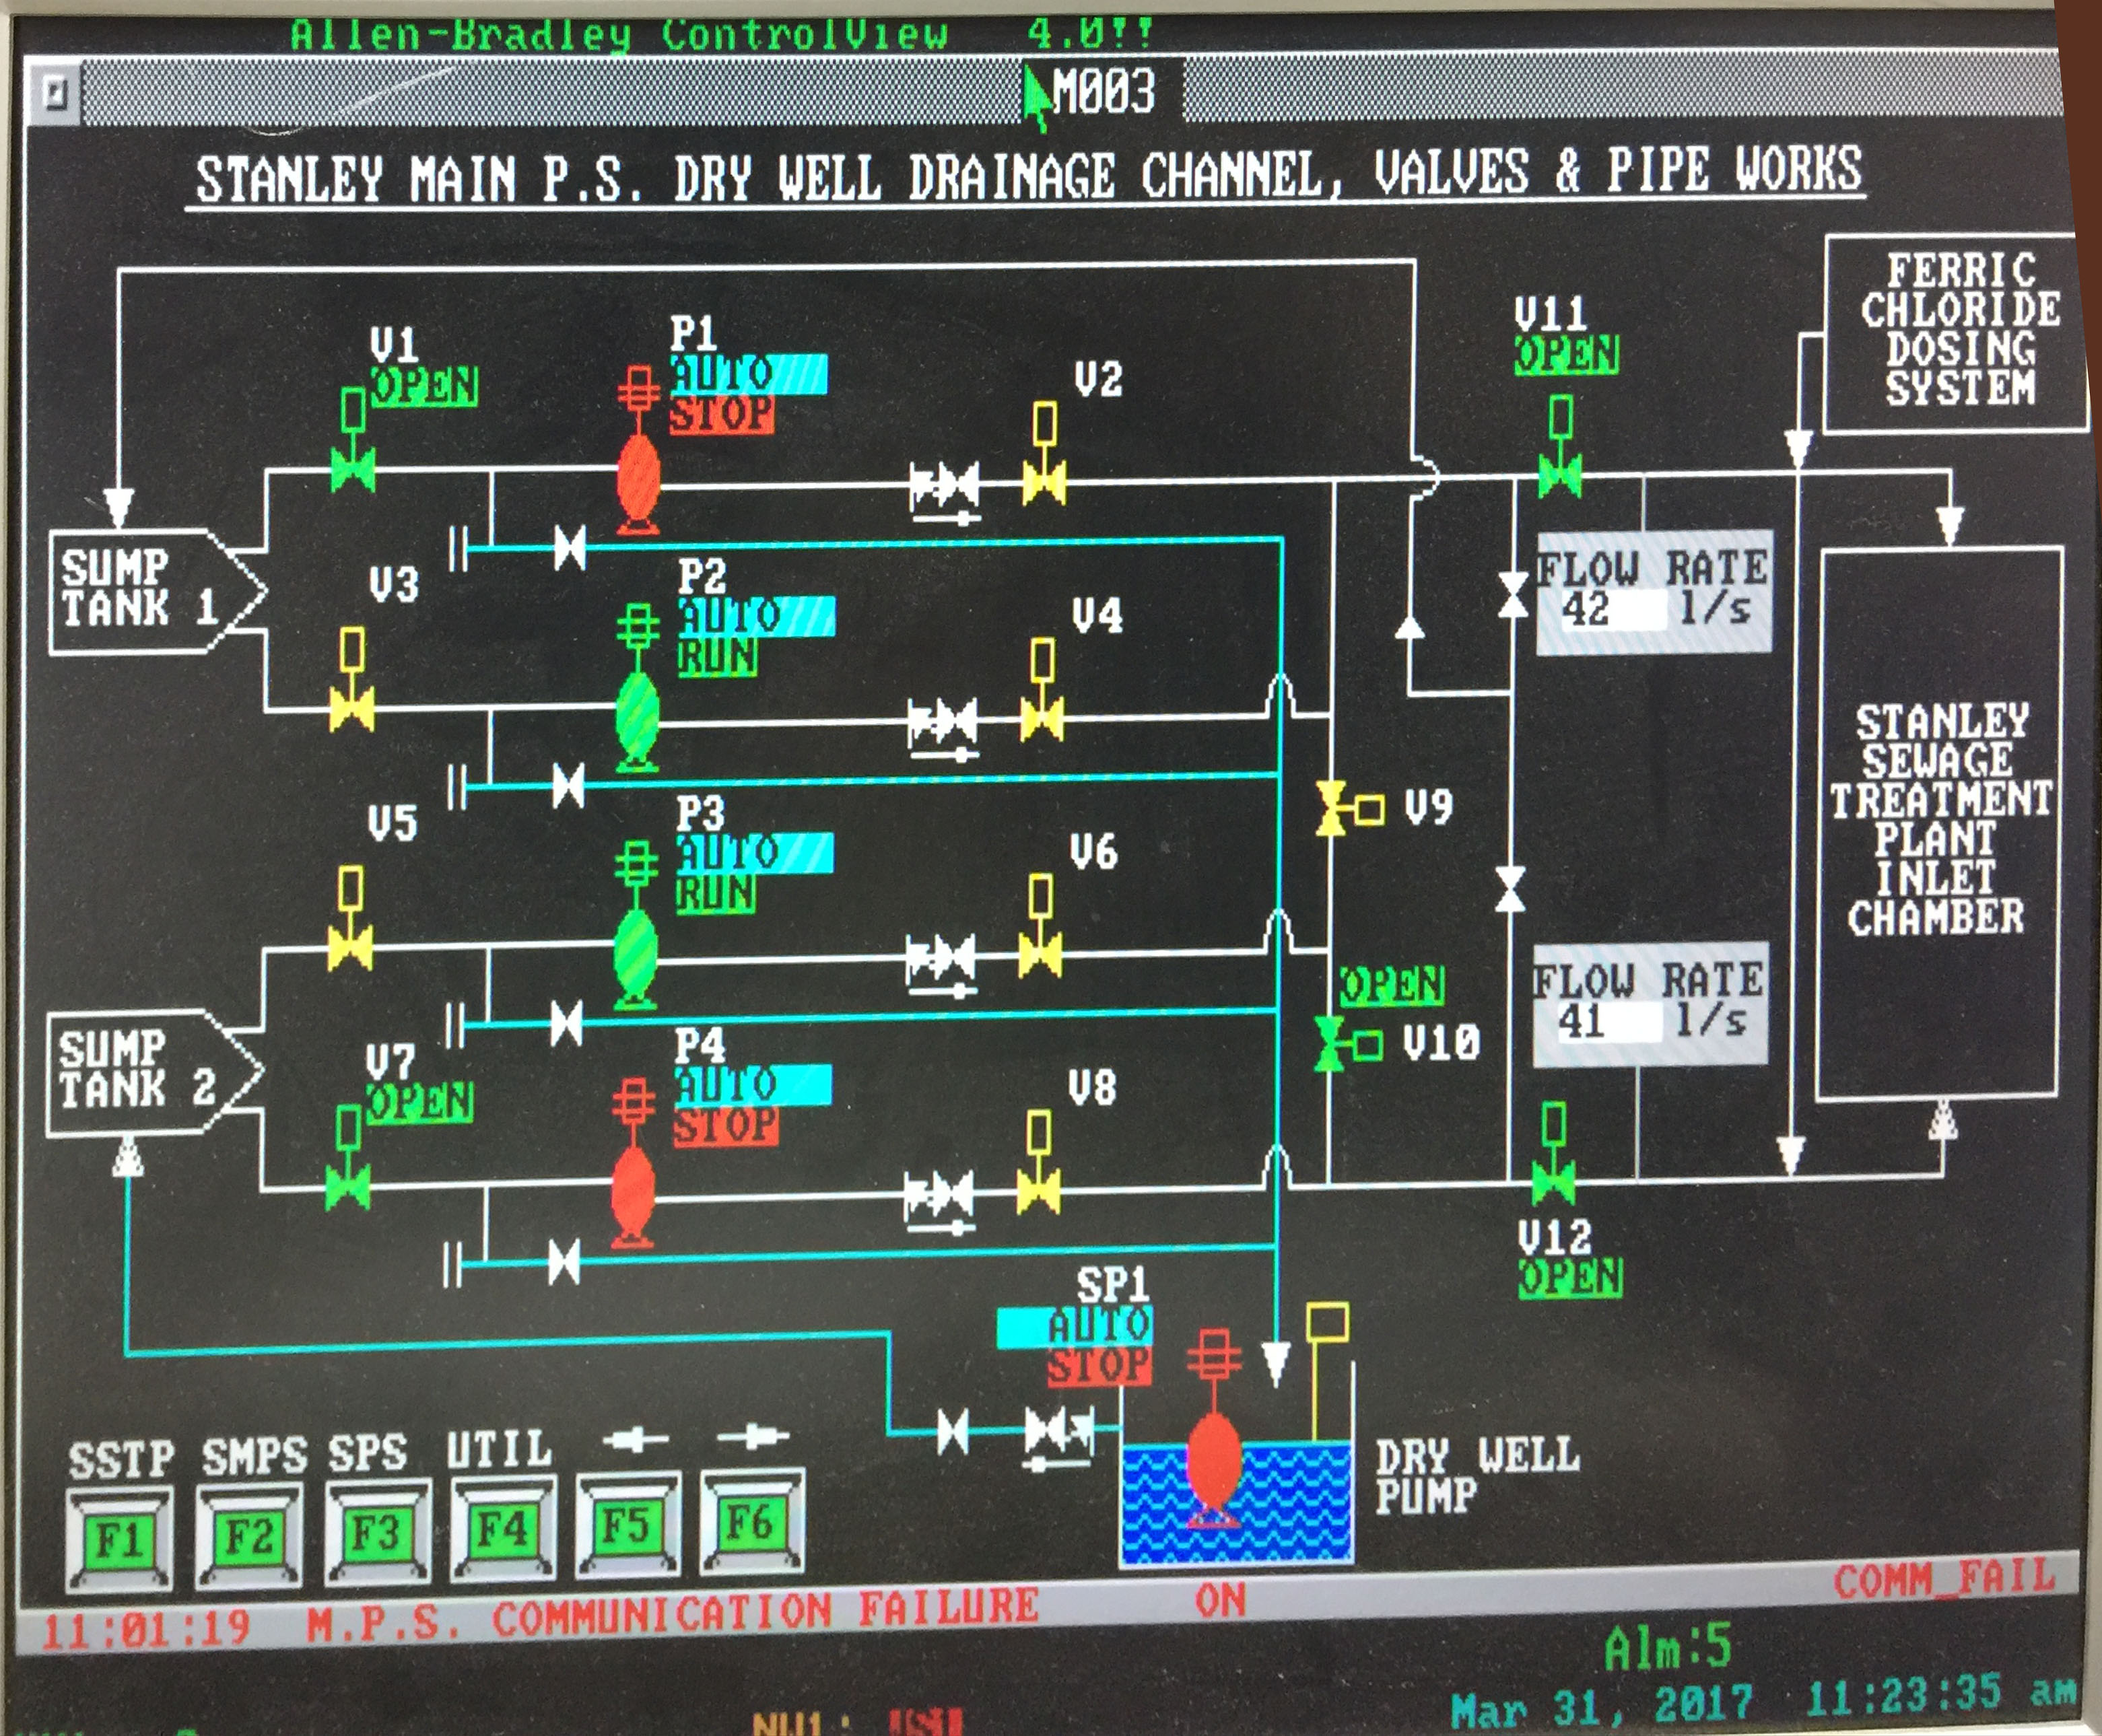 Part of Stanley Main Pumping Station Sump Pump System screenshot from ControlView Before Works in DSD Stanley STW (Typical)